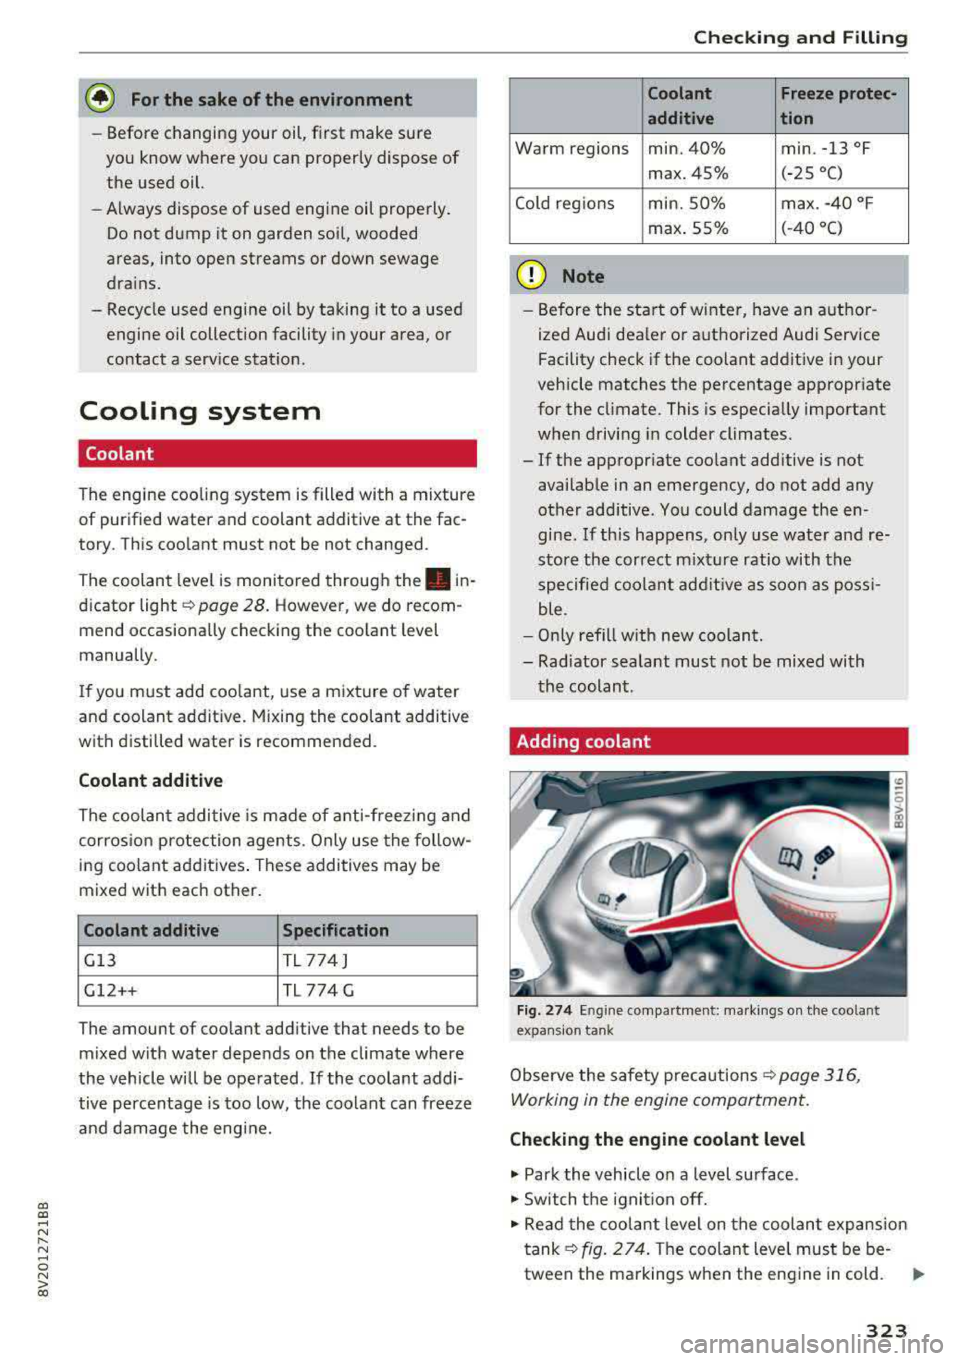 AUDI A3 SEDAN 2017  Owners Manual a,  a, ..... N 
" N ..... 0 N > 00 
@ For the  sake  of  the  environment 
-Before  changing  your  oil,  first  make  sure 
you  know  where  yo u can  properly  dispose  of 
the  used  oil. 
- Alway